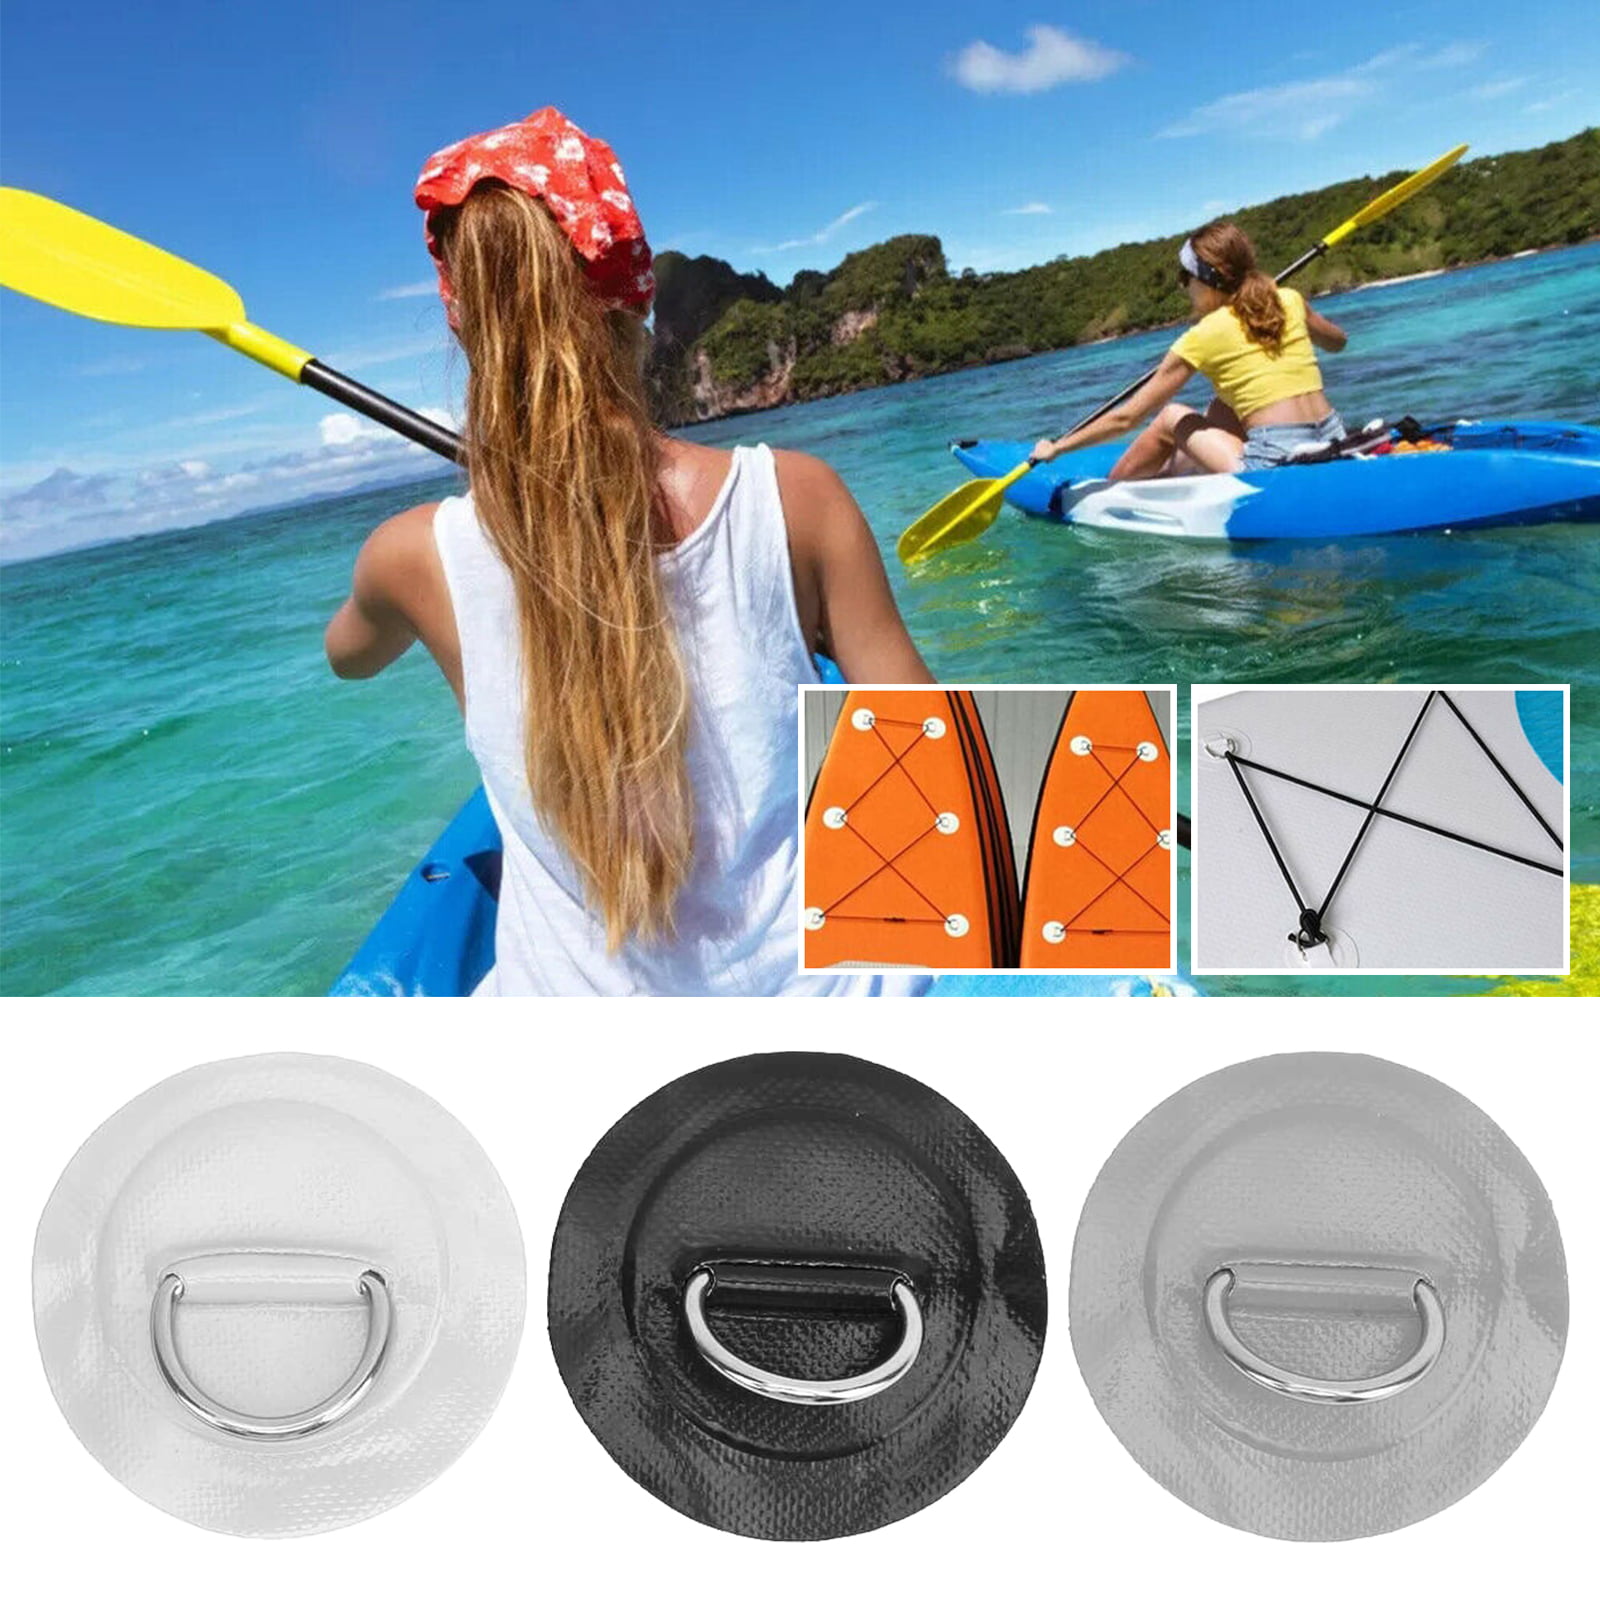 4 Stainless Steel D-ring Pad/Patch 11cm for PVC Inflatable Boat Kayak Dinghy 